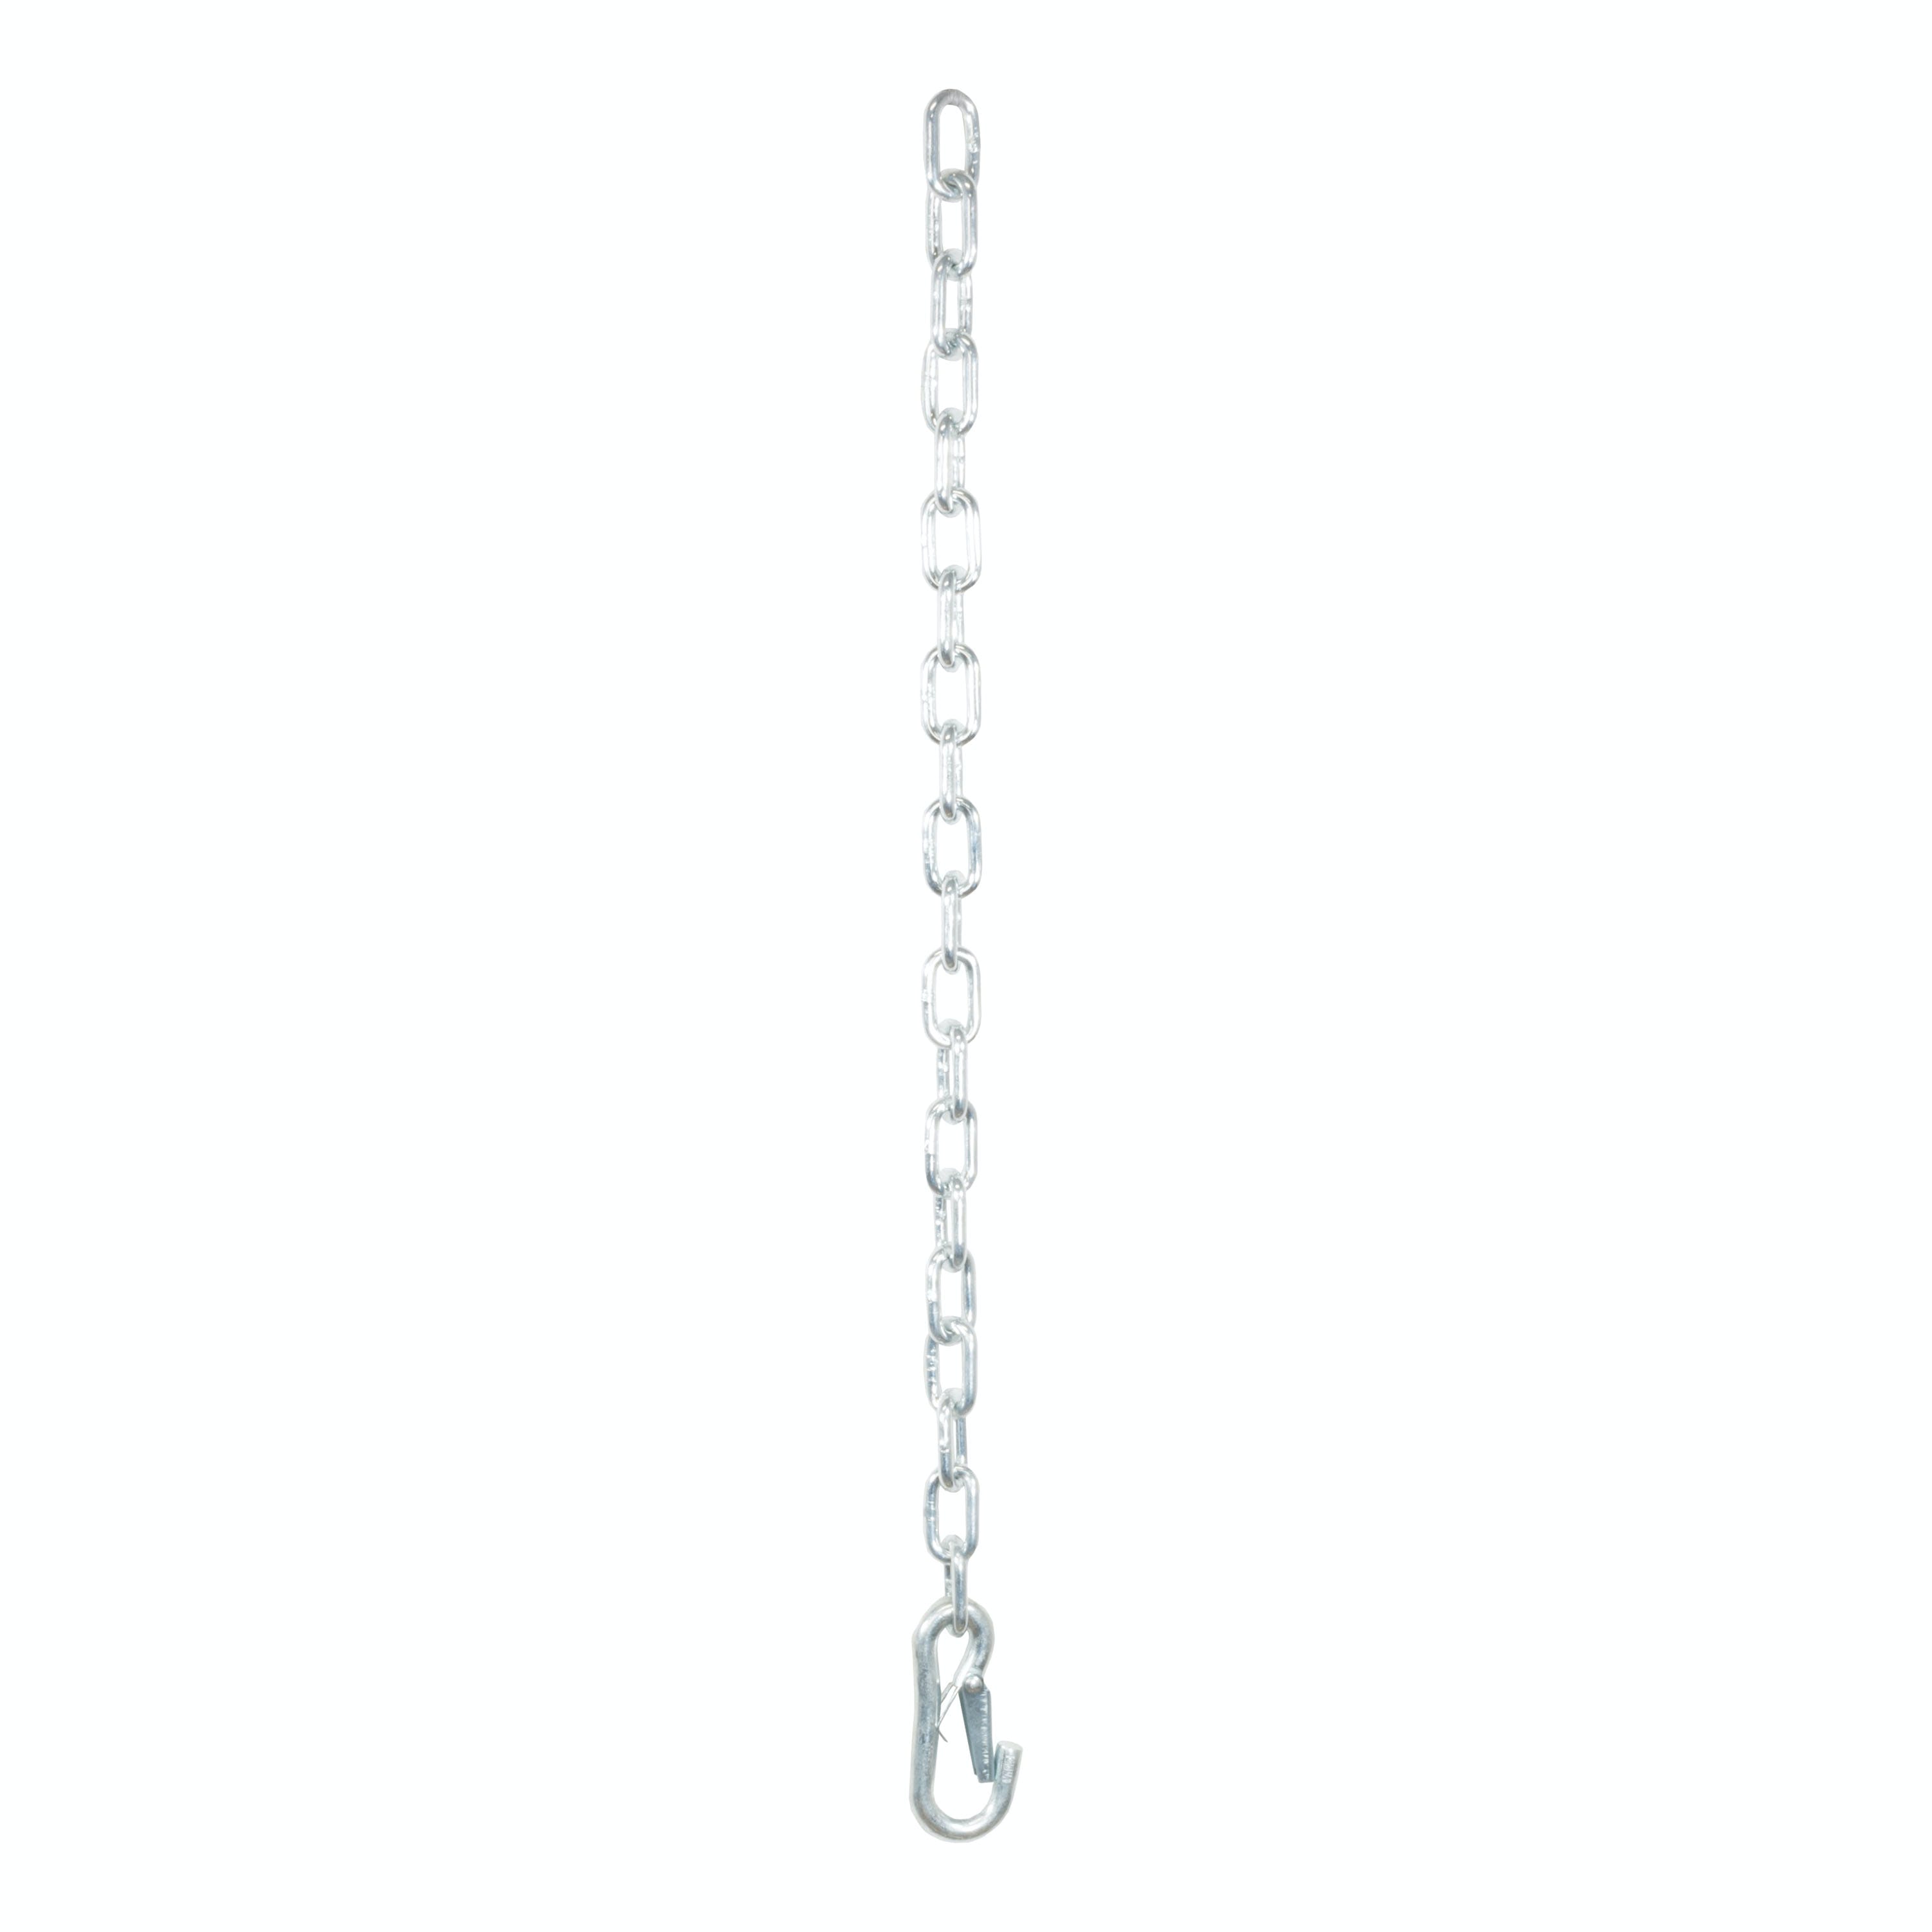 CURT 80313 27 Safety Chain with 1 Snap Hook (5,000 lbs, Clear Zinc)